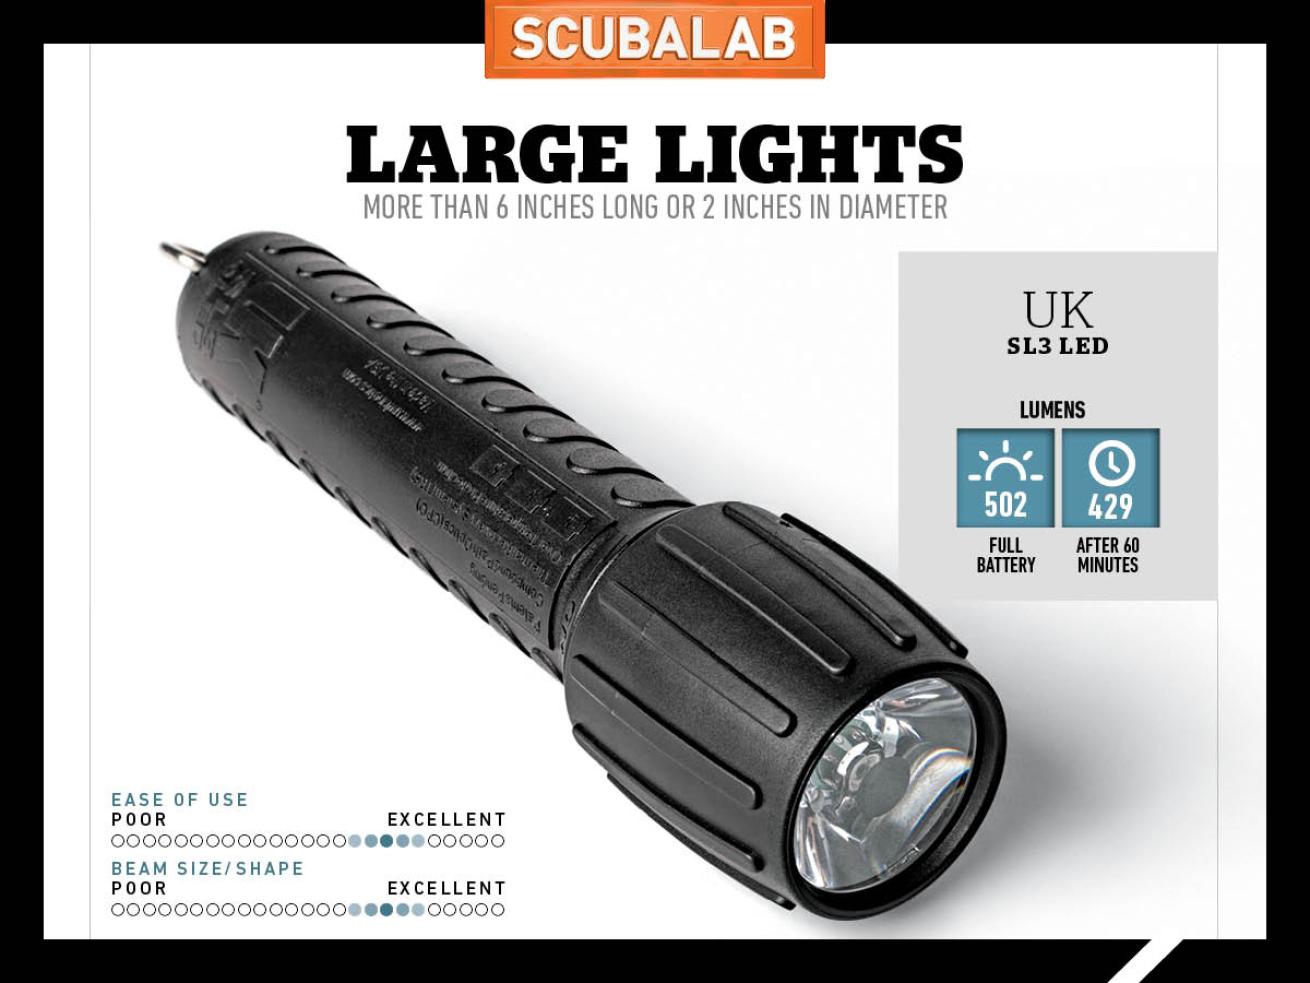 UK SL3 eLED Scuba Diving Light Reviewed by ScubaLab